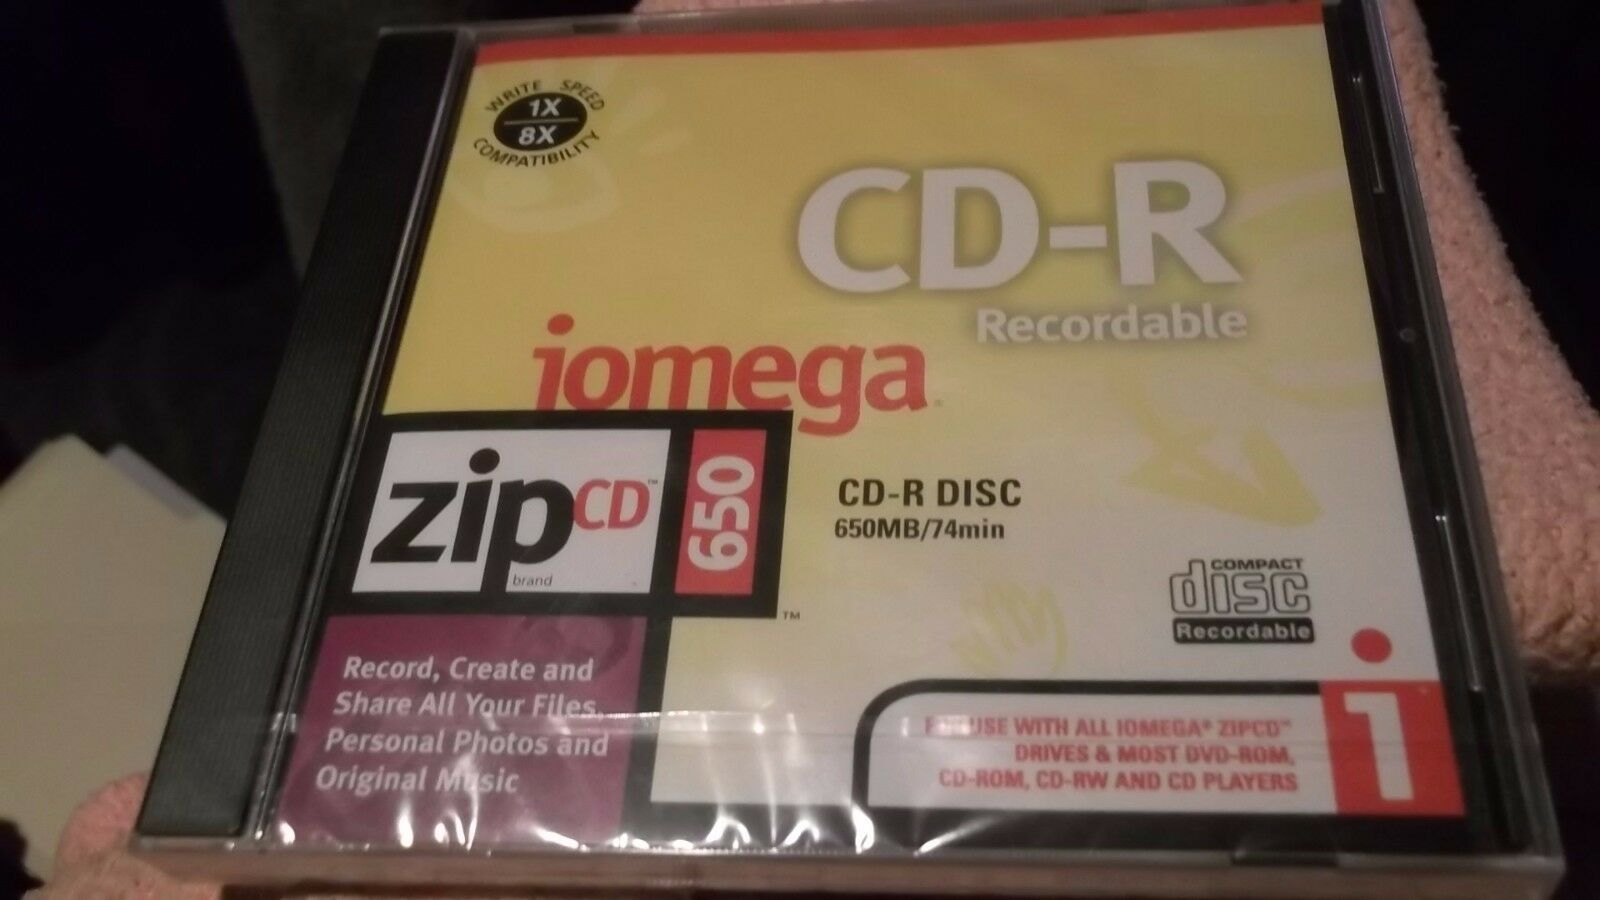 Iomega Recordable Zipcd 650 Cd-r Disc W/ Write Speed 1x - 8x 1 Pack